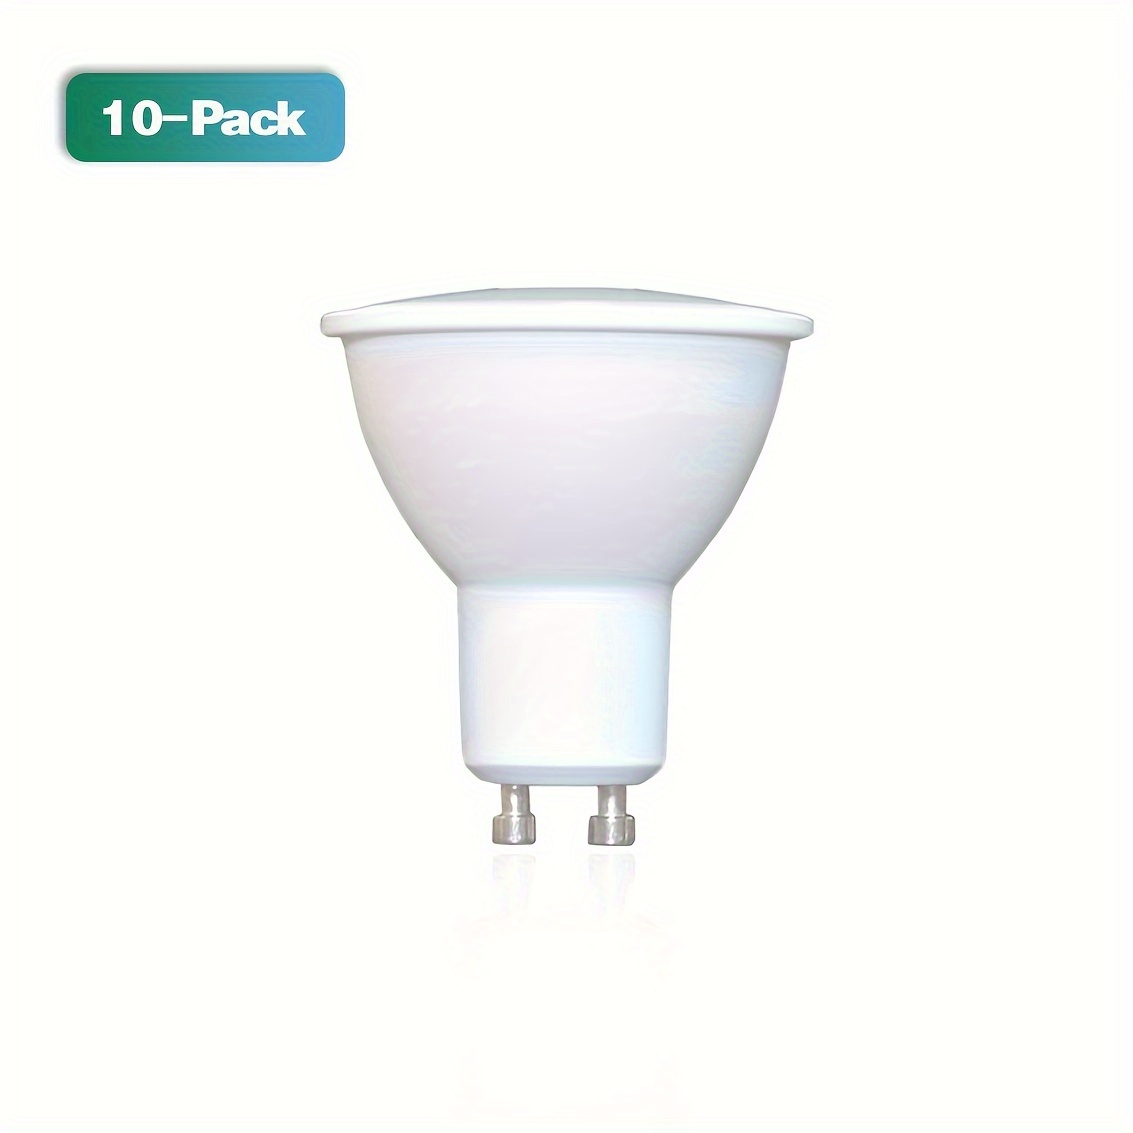 

10pcs Mr16 Led Bulb, 6w (equivalent To 50w),gu10 Base,480lm Cri80+ Ac220-240v, 3000-6500k Bright For Home And Office, Energy Saver